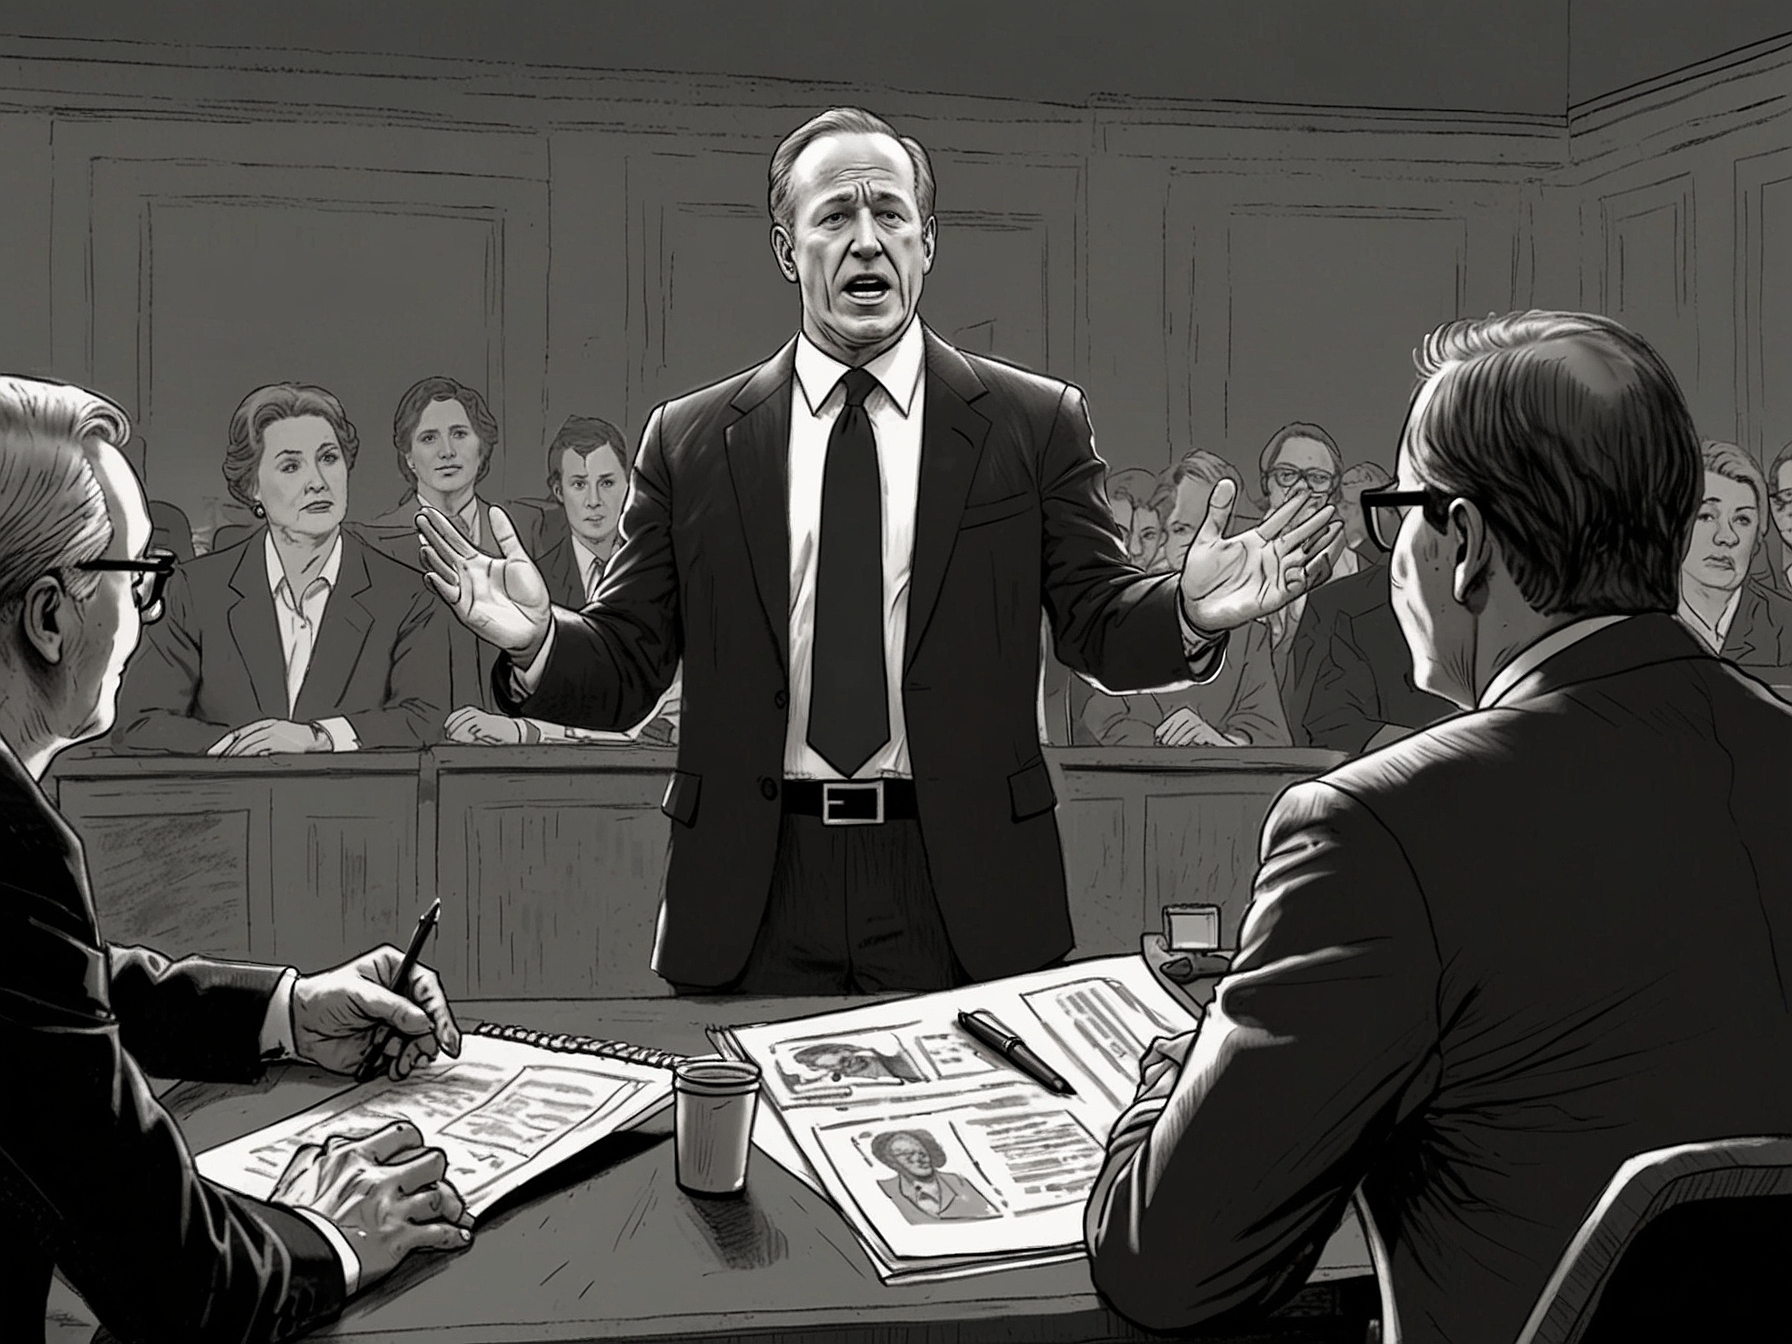 An image depicting Kevin Hollinrake addressing journalists, emphasizing the importance of integrity in political communication. This scene showcases the heated scrutiny surrounding the misleading clip controversy.